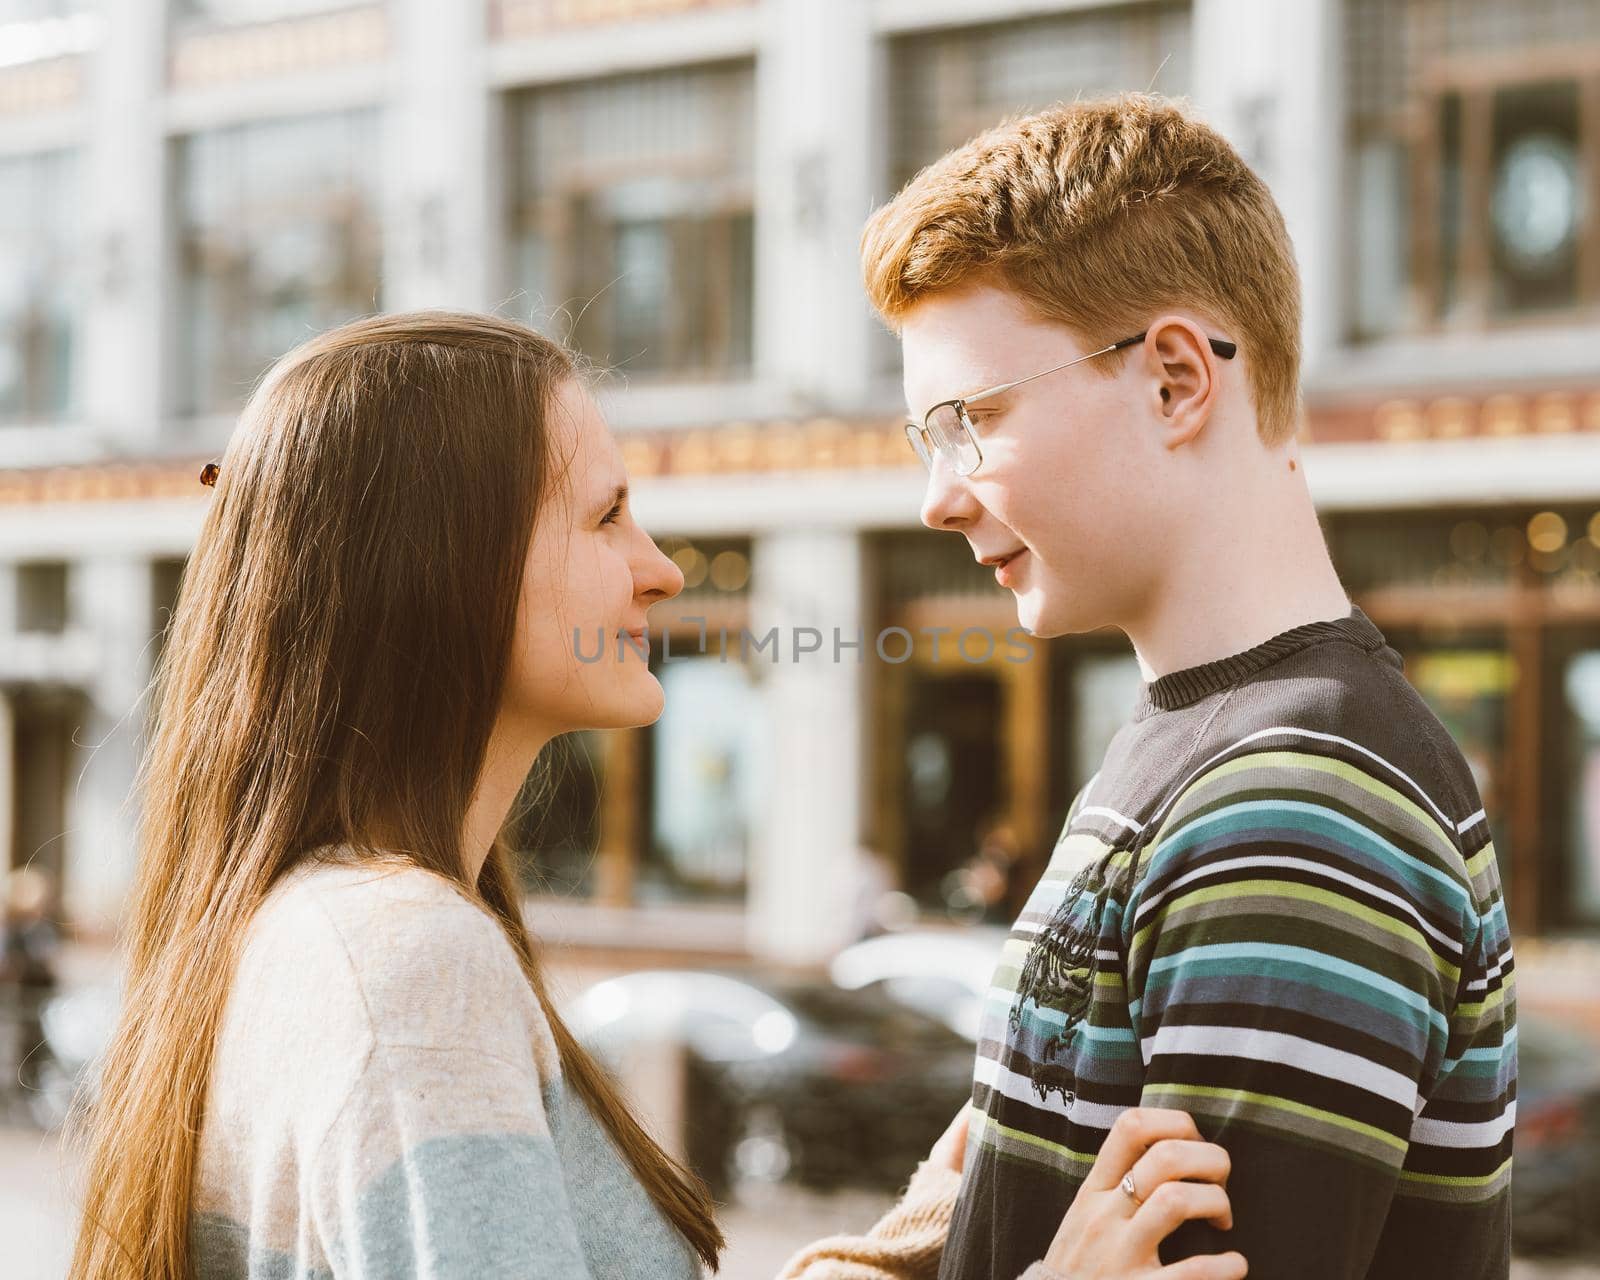 Male and female person looking at each other, young couple full of love. The redhead boy looks tenderly at girl and kiss. Concept of a teenage love and first kiss, love, relationship. City, waterfront.